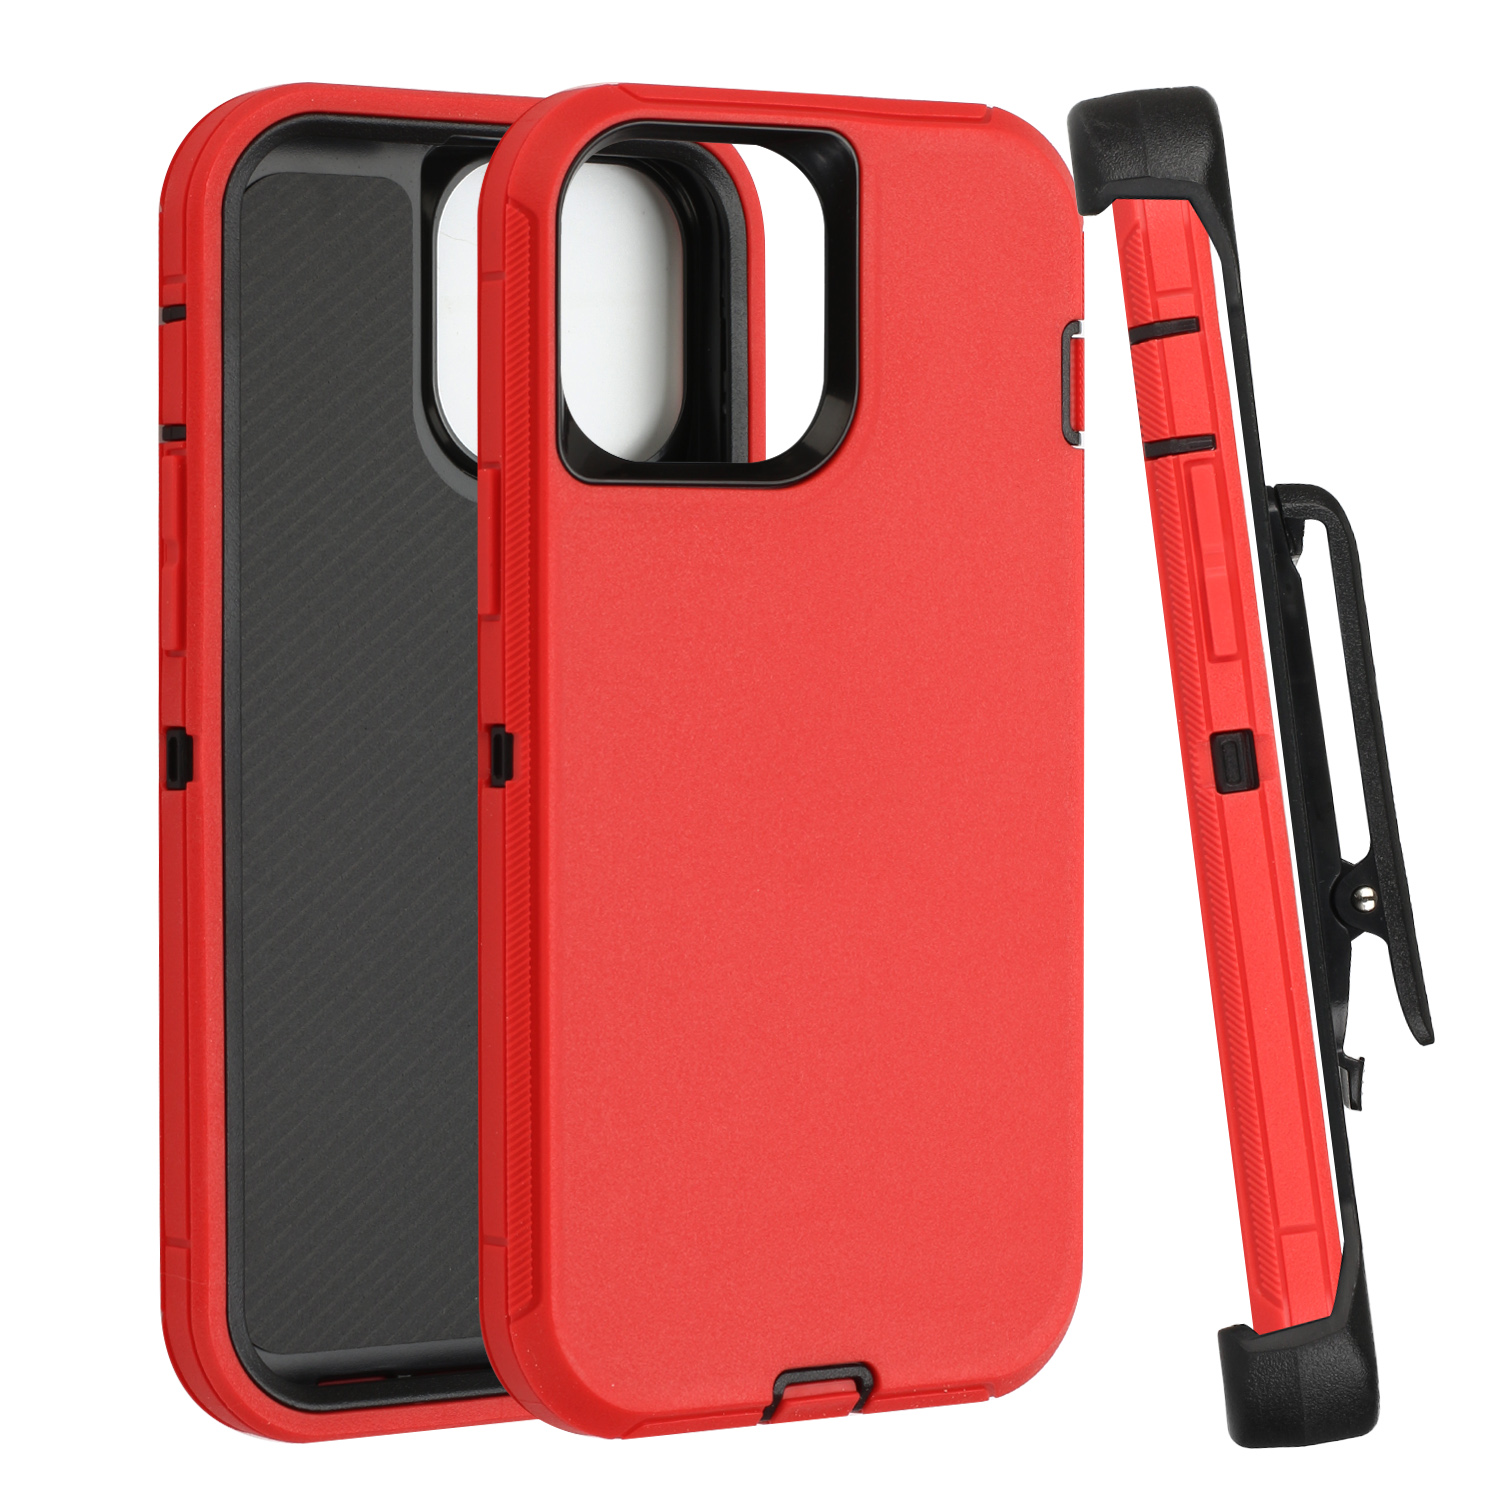 Phone Case : iPhone 13 Pro Max Otterbox Defender Case Adapter